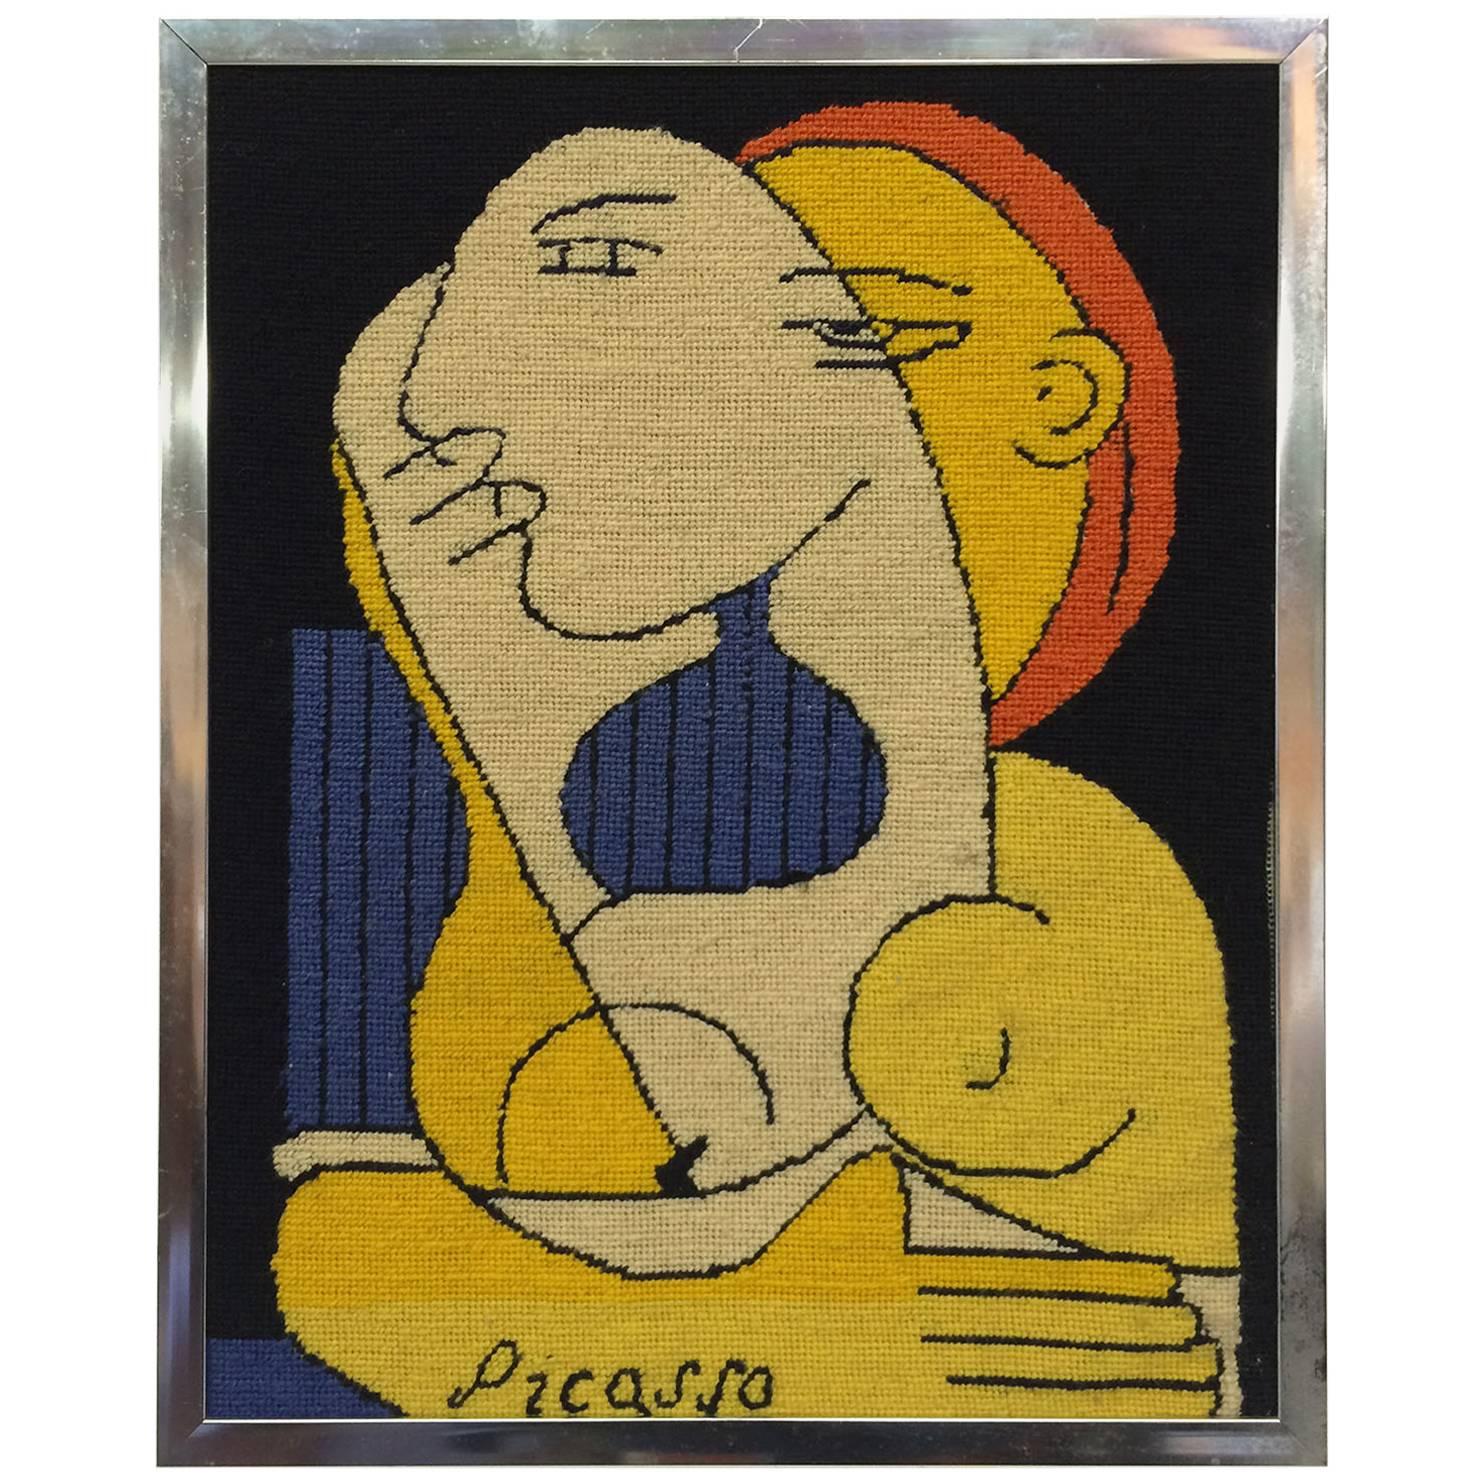 Colorful Needle Point Tapestry after Picasso